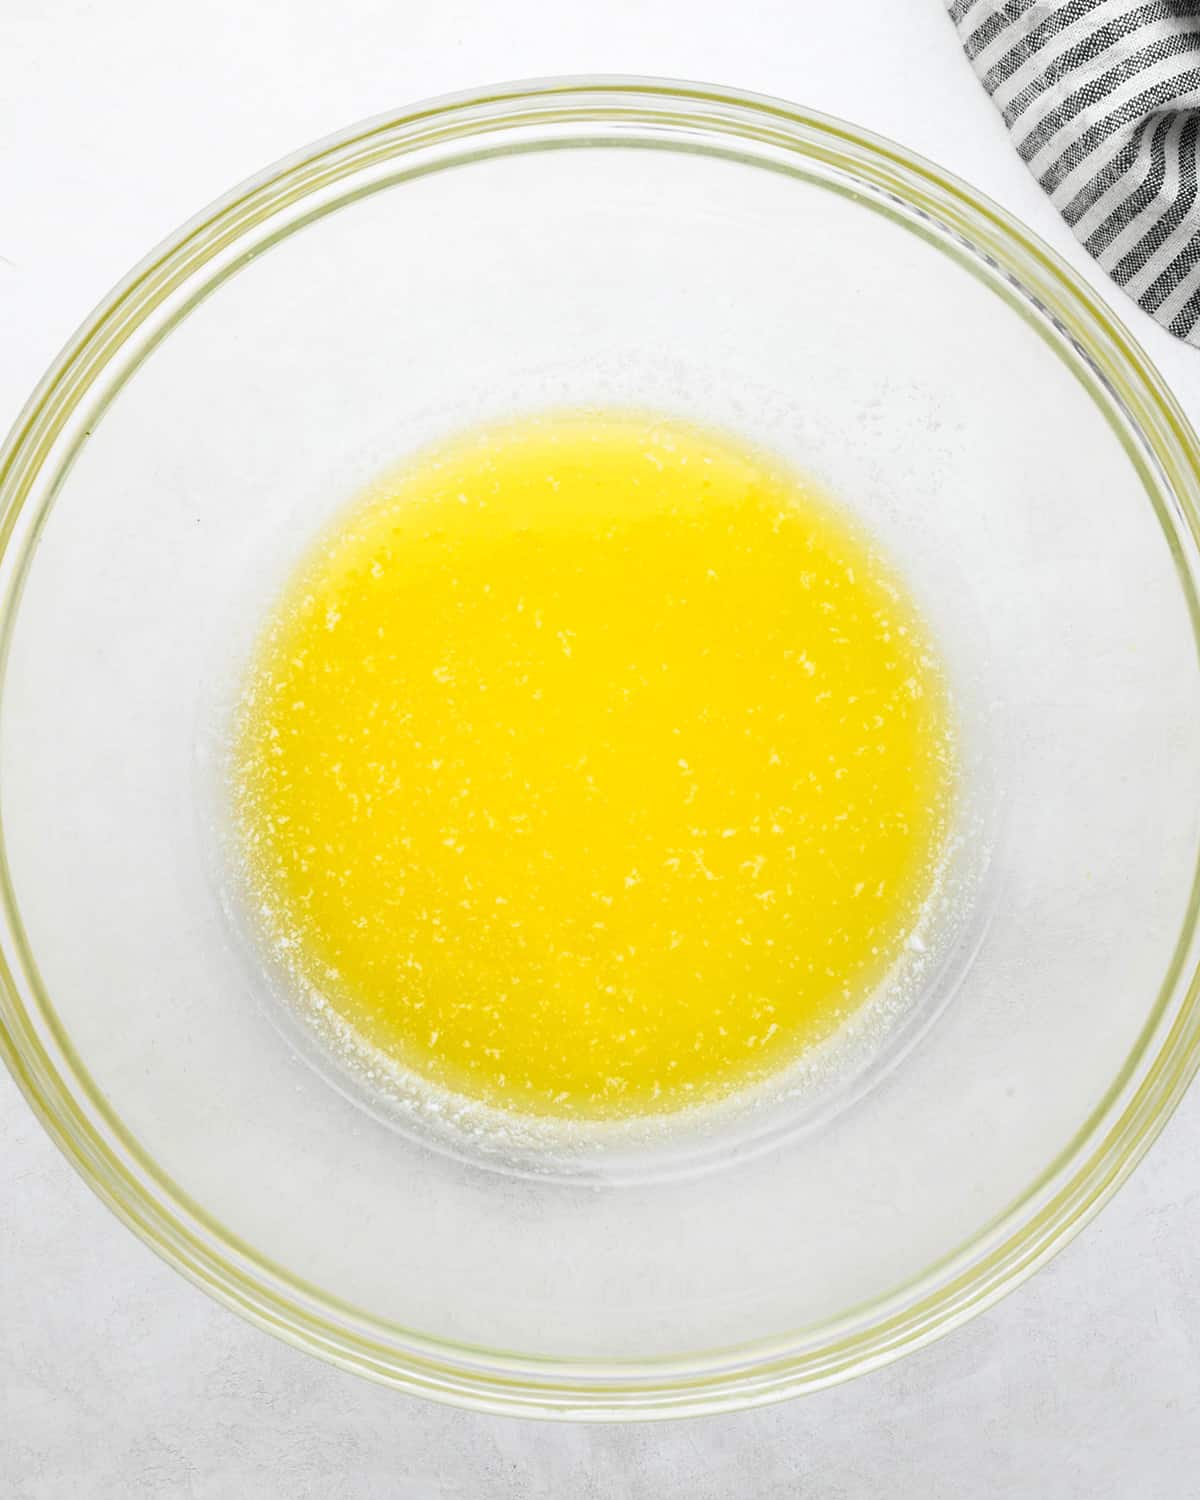 melted butter in a glass bowl